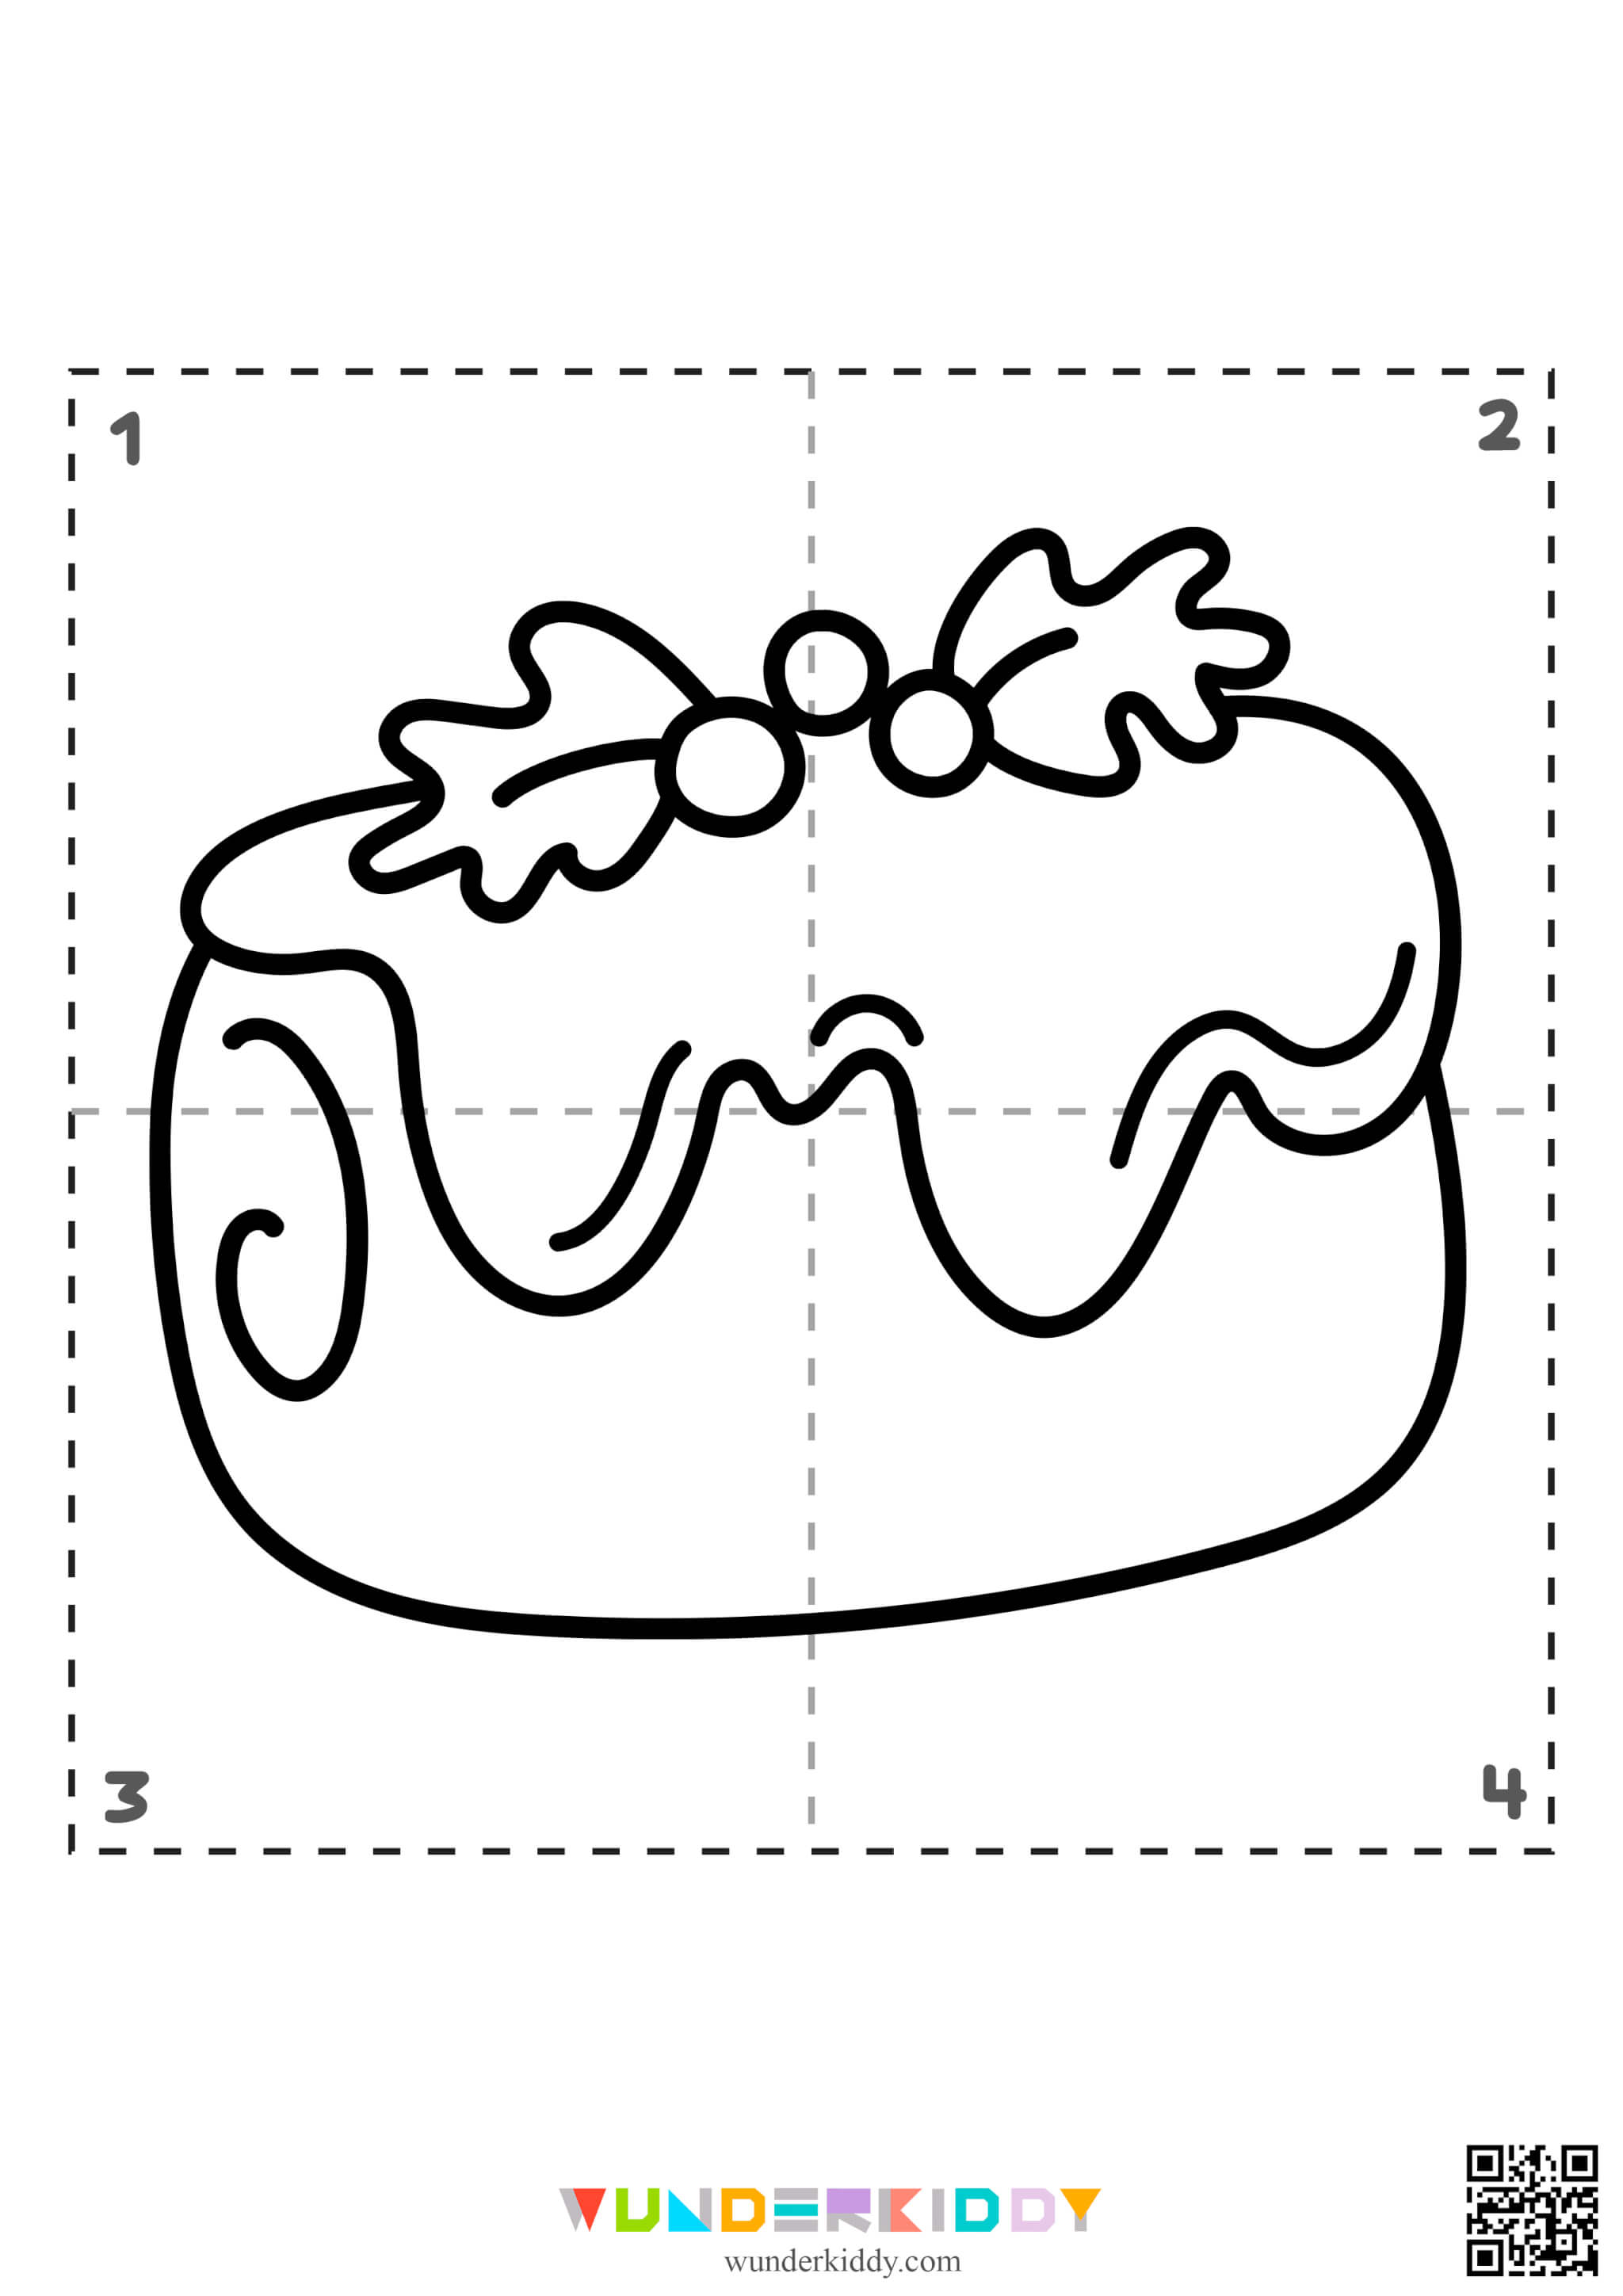 Coloring pages «New Year's Puzzle» - Image 10